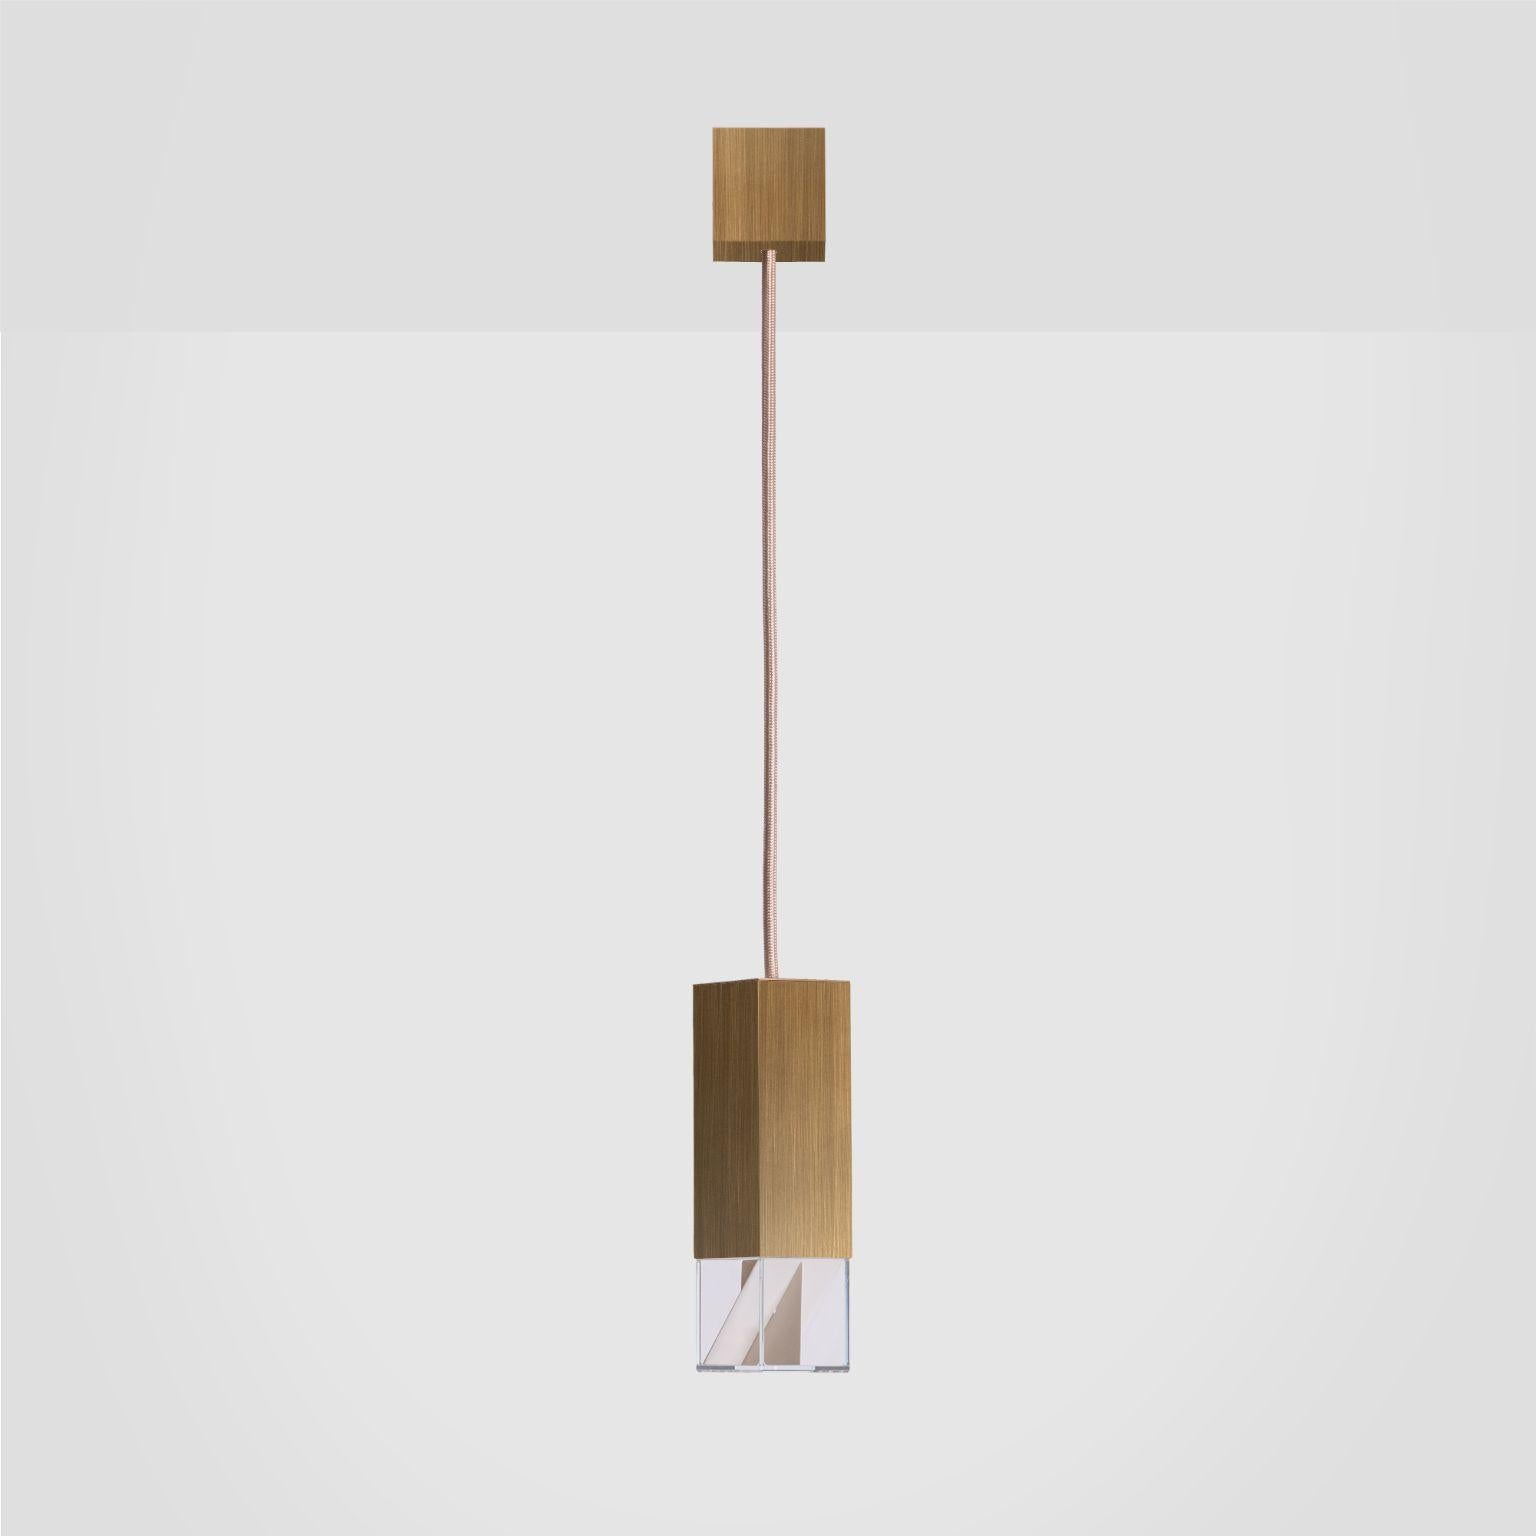 Lamp One Brass 01 Revamp Edition by Formaminima
Dimensions: D5 x W5 x H 17 cm.
Materials: Body lamp and ceiling rose: solid burnished satin brass, matt finish Crystal glass diffuser, Limoges porcelain sheets, biscuit-finish.

All our lamps can